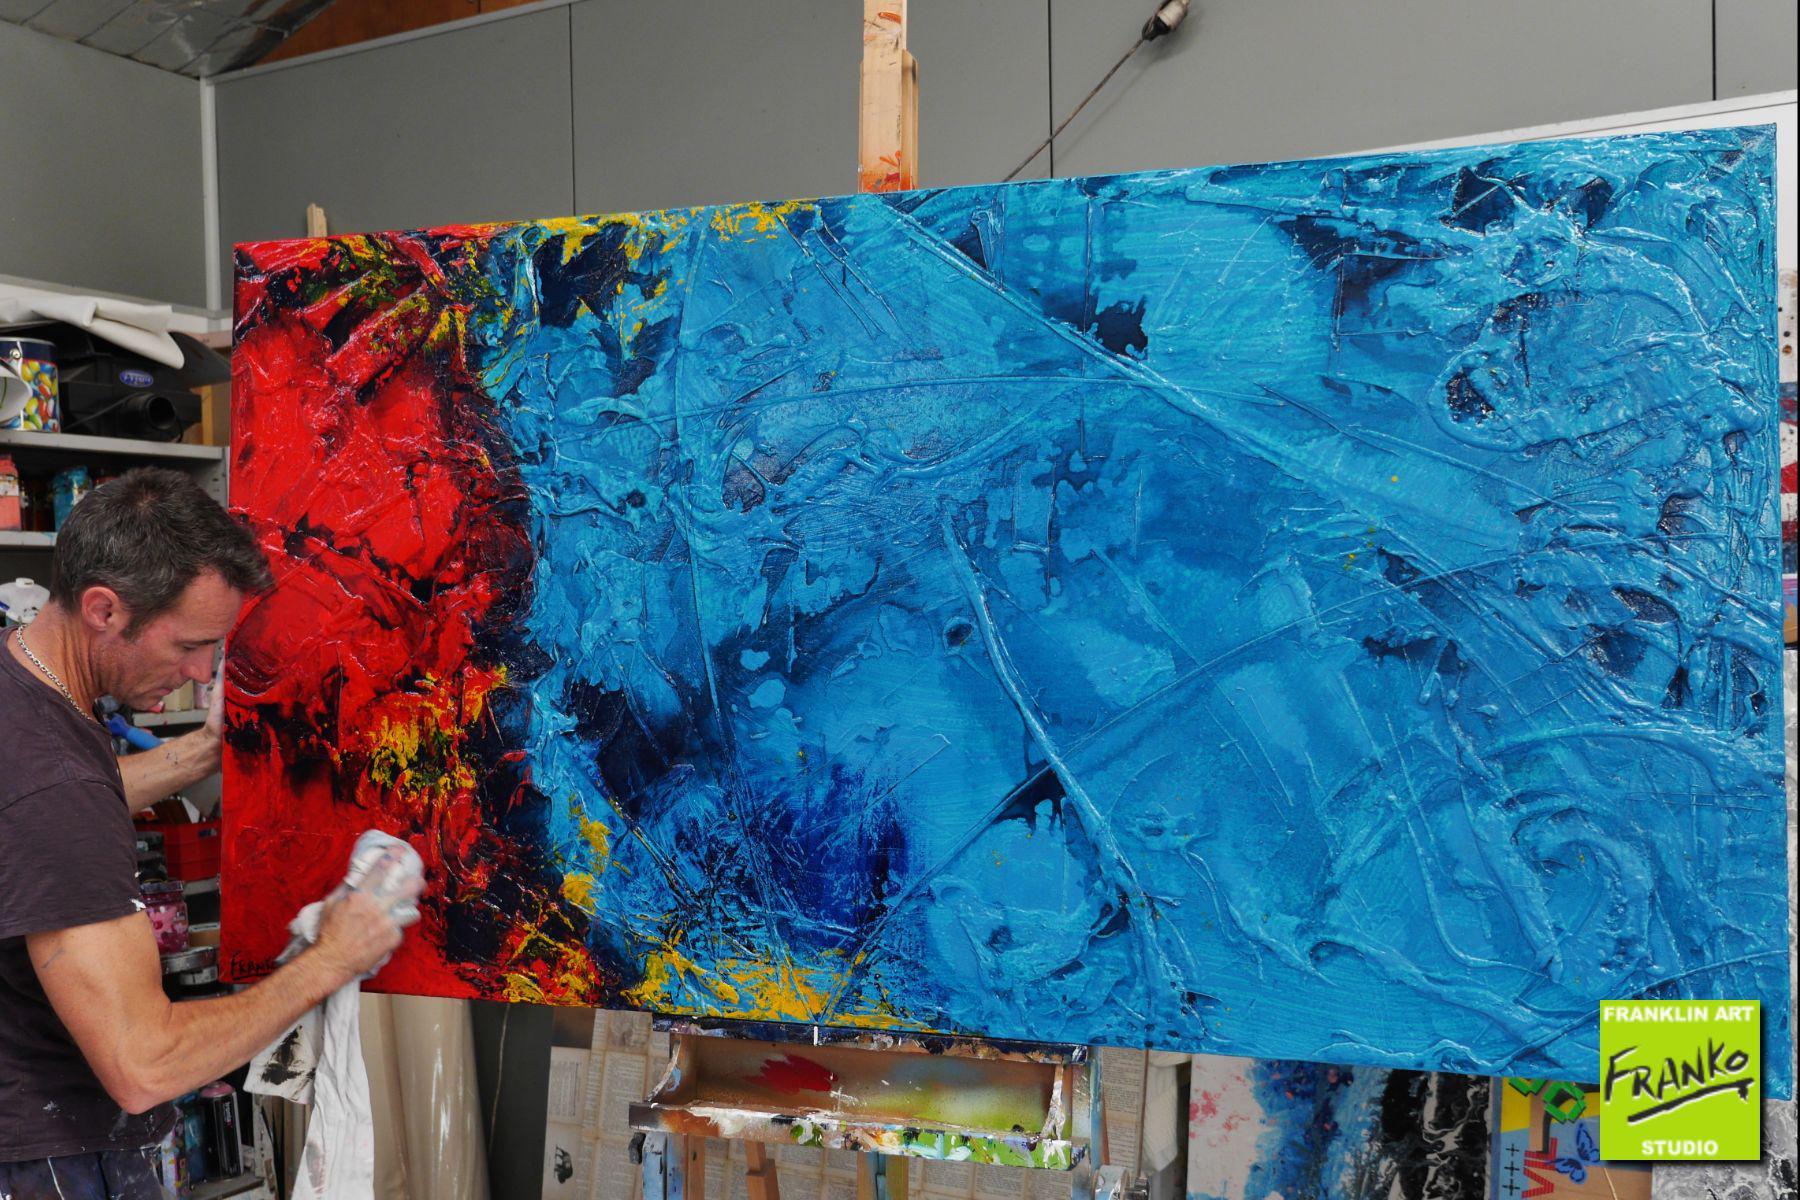 Red & Teal Ice 190cm x 100cm Blue Red Textured Abstract Painting (SOLD)-Abstract-Franko-[franko_artist]-[Art]-[interior_design]-Franklin Art Studio